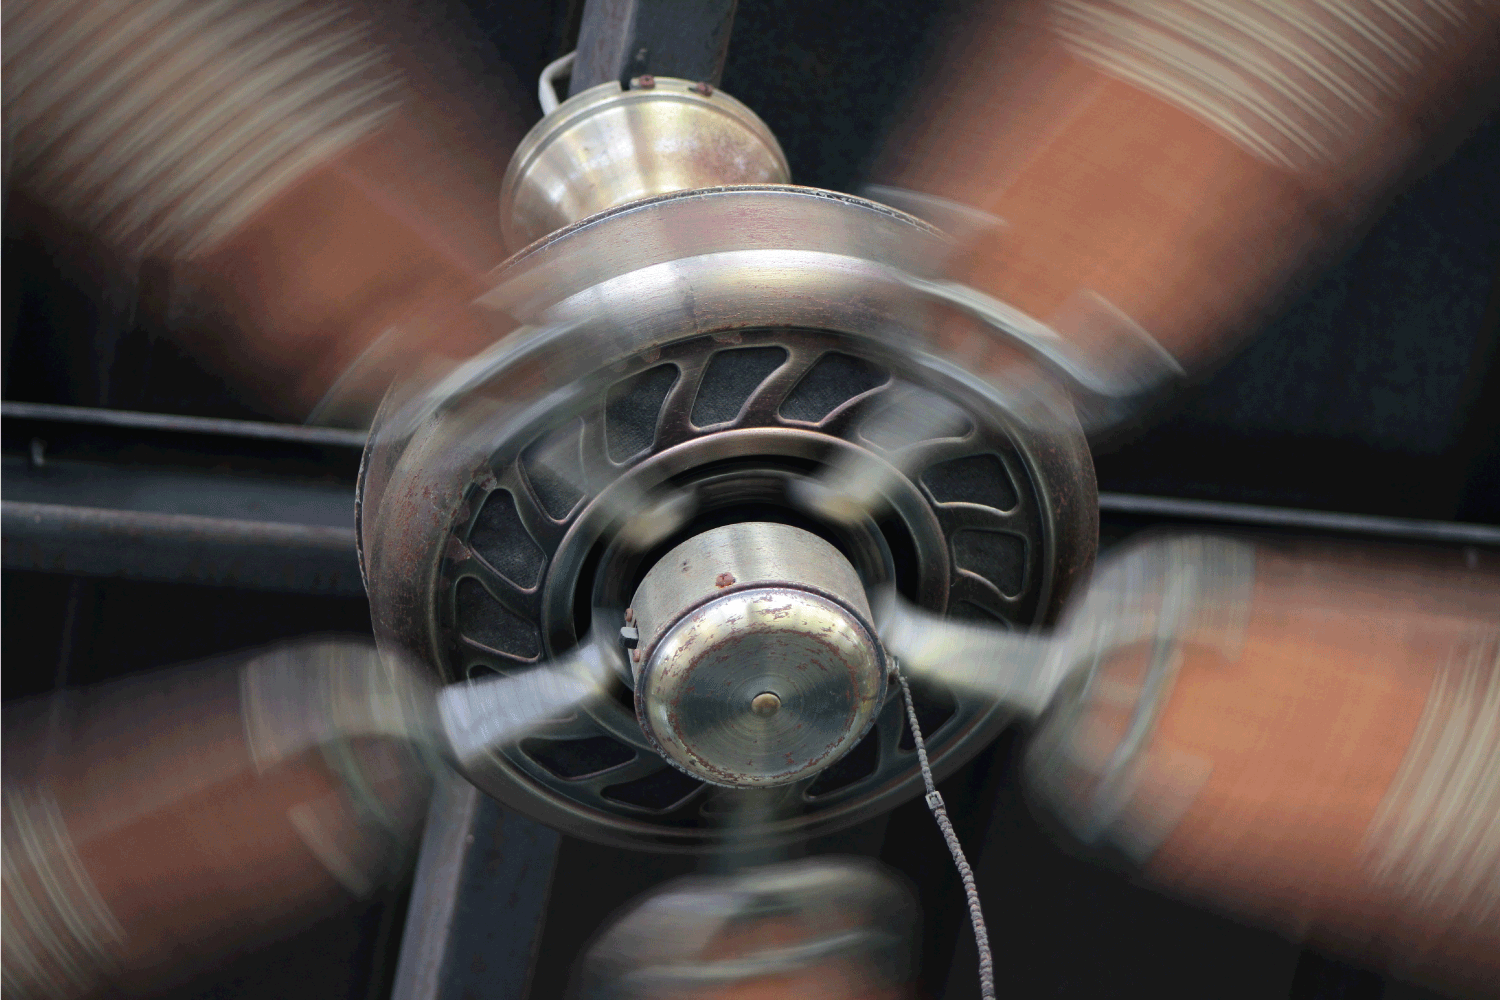 Ceiling fan blades are spinning and running.